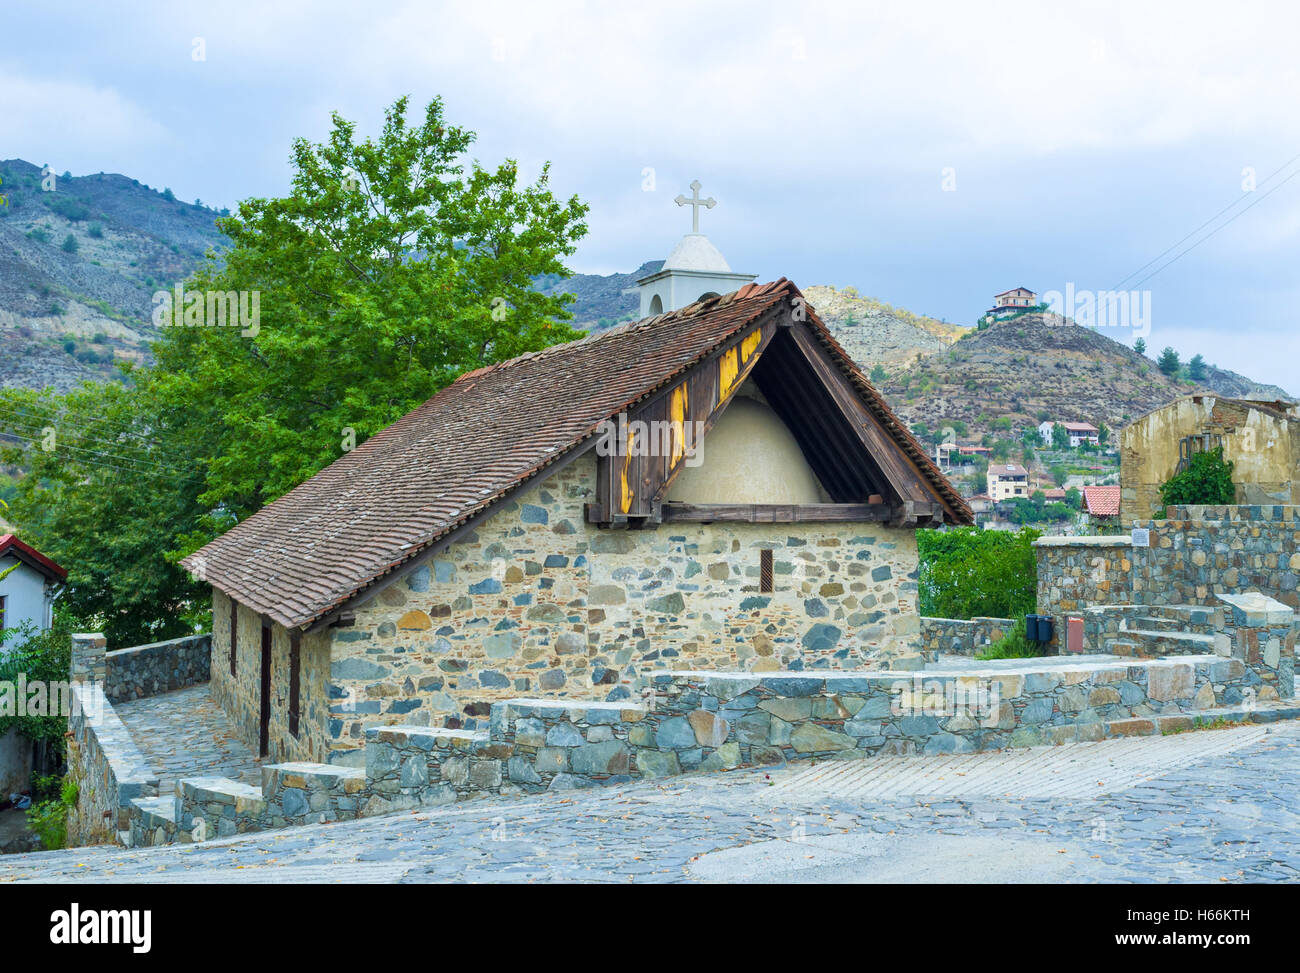 The old church in the mountain village, its dome covered with the tiled roof, Farmakas, Cyprus. Stock Photo